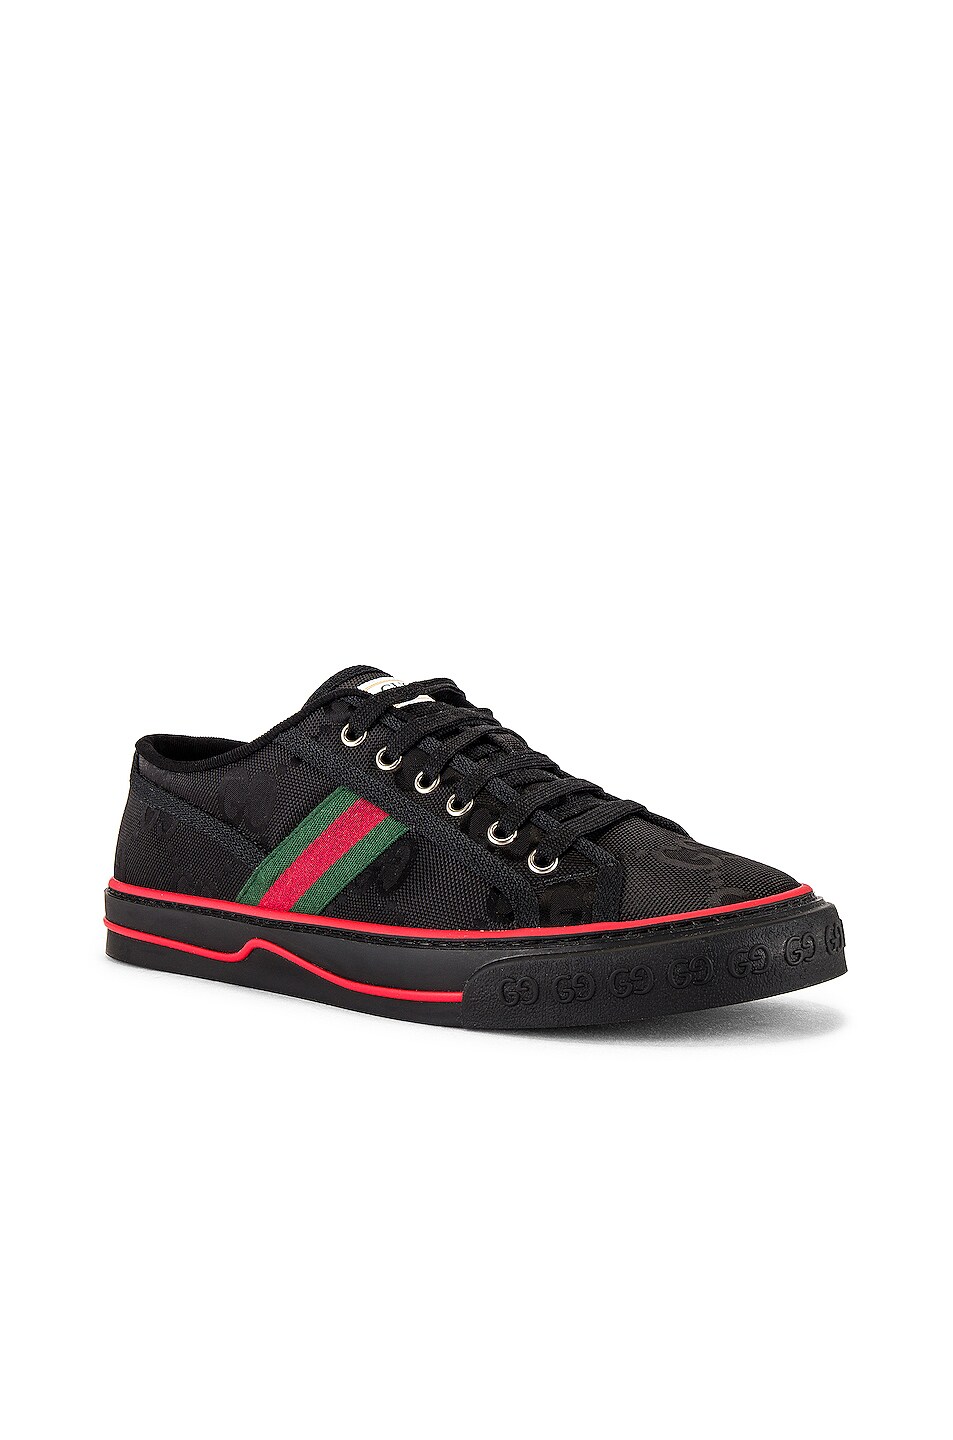 Image 1 of Gucci Gucci Tennis 1977 Low Top Sneaker in Black/Black/Green & Blue